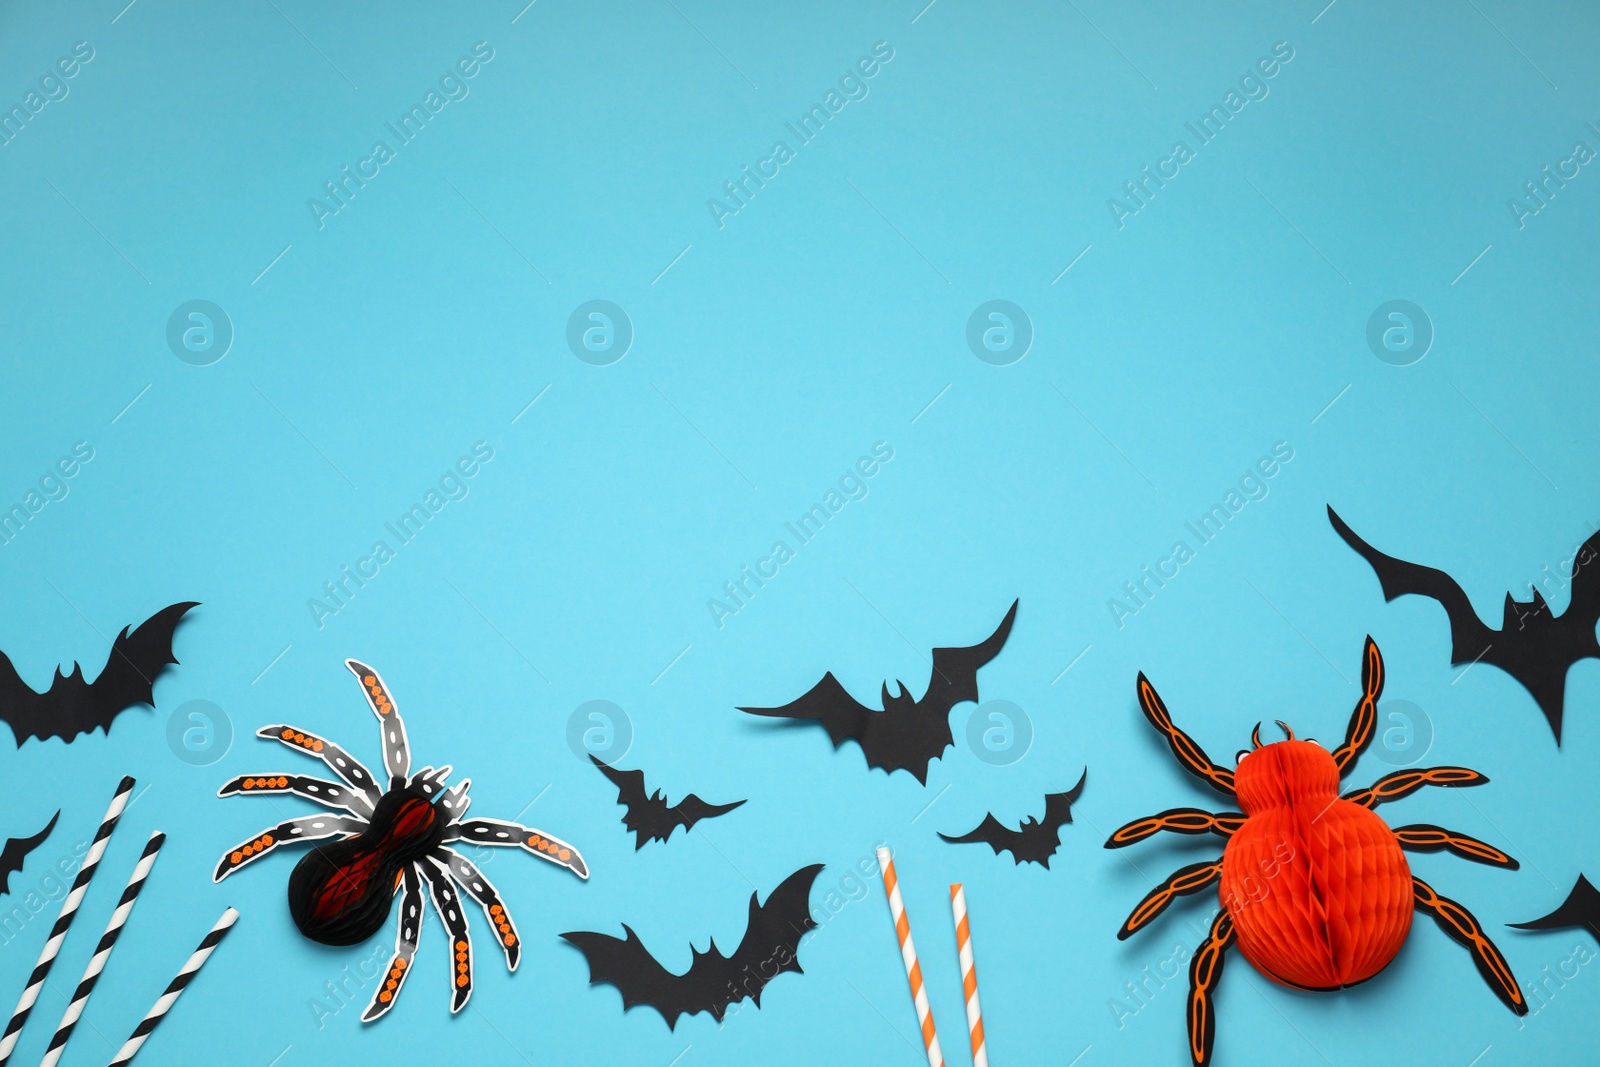 Photo of Flat lay composition with paper bats, spiders and cocktail straws on light blue background, space for text. Halloween decor